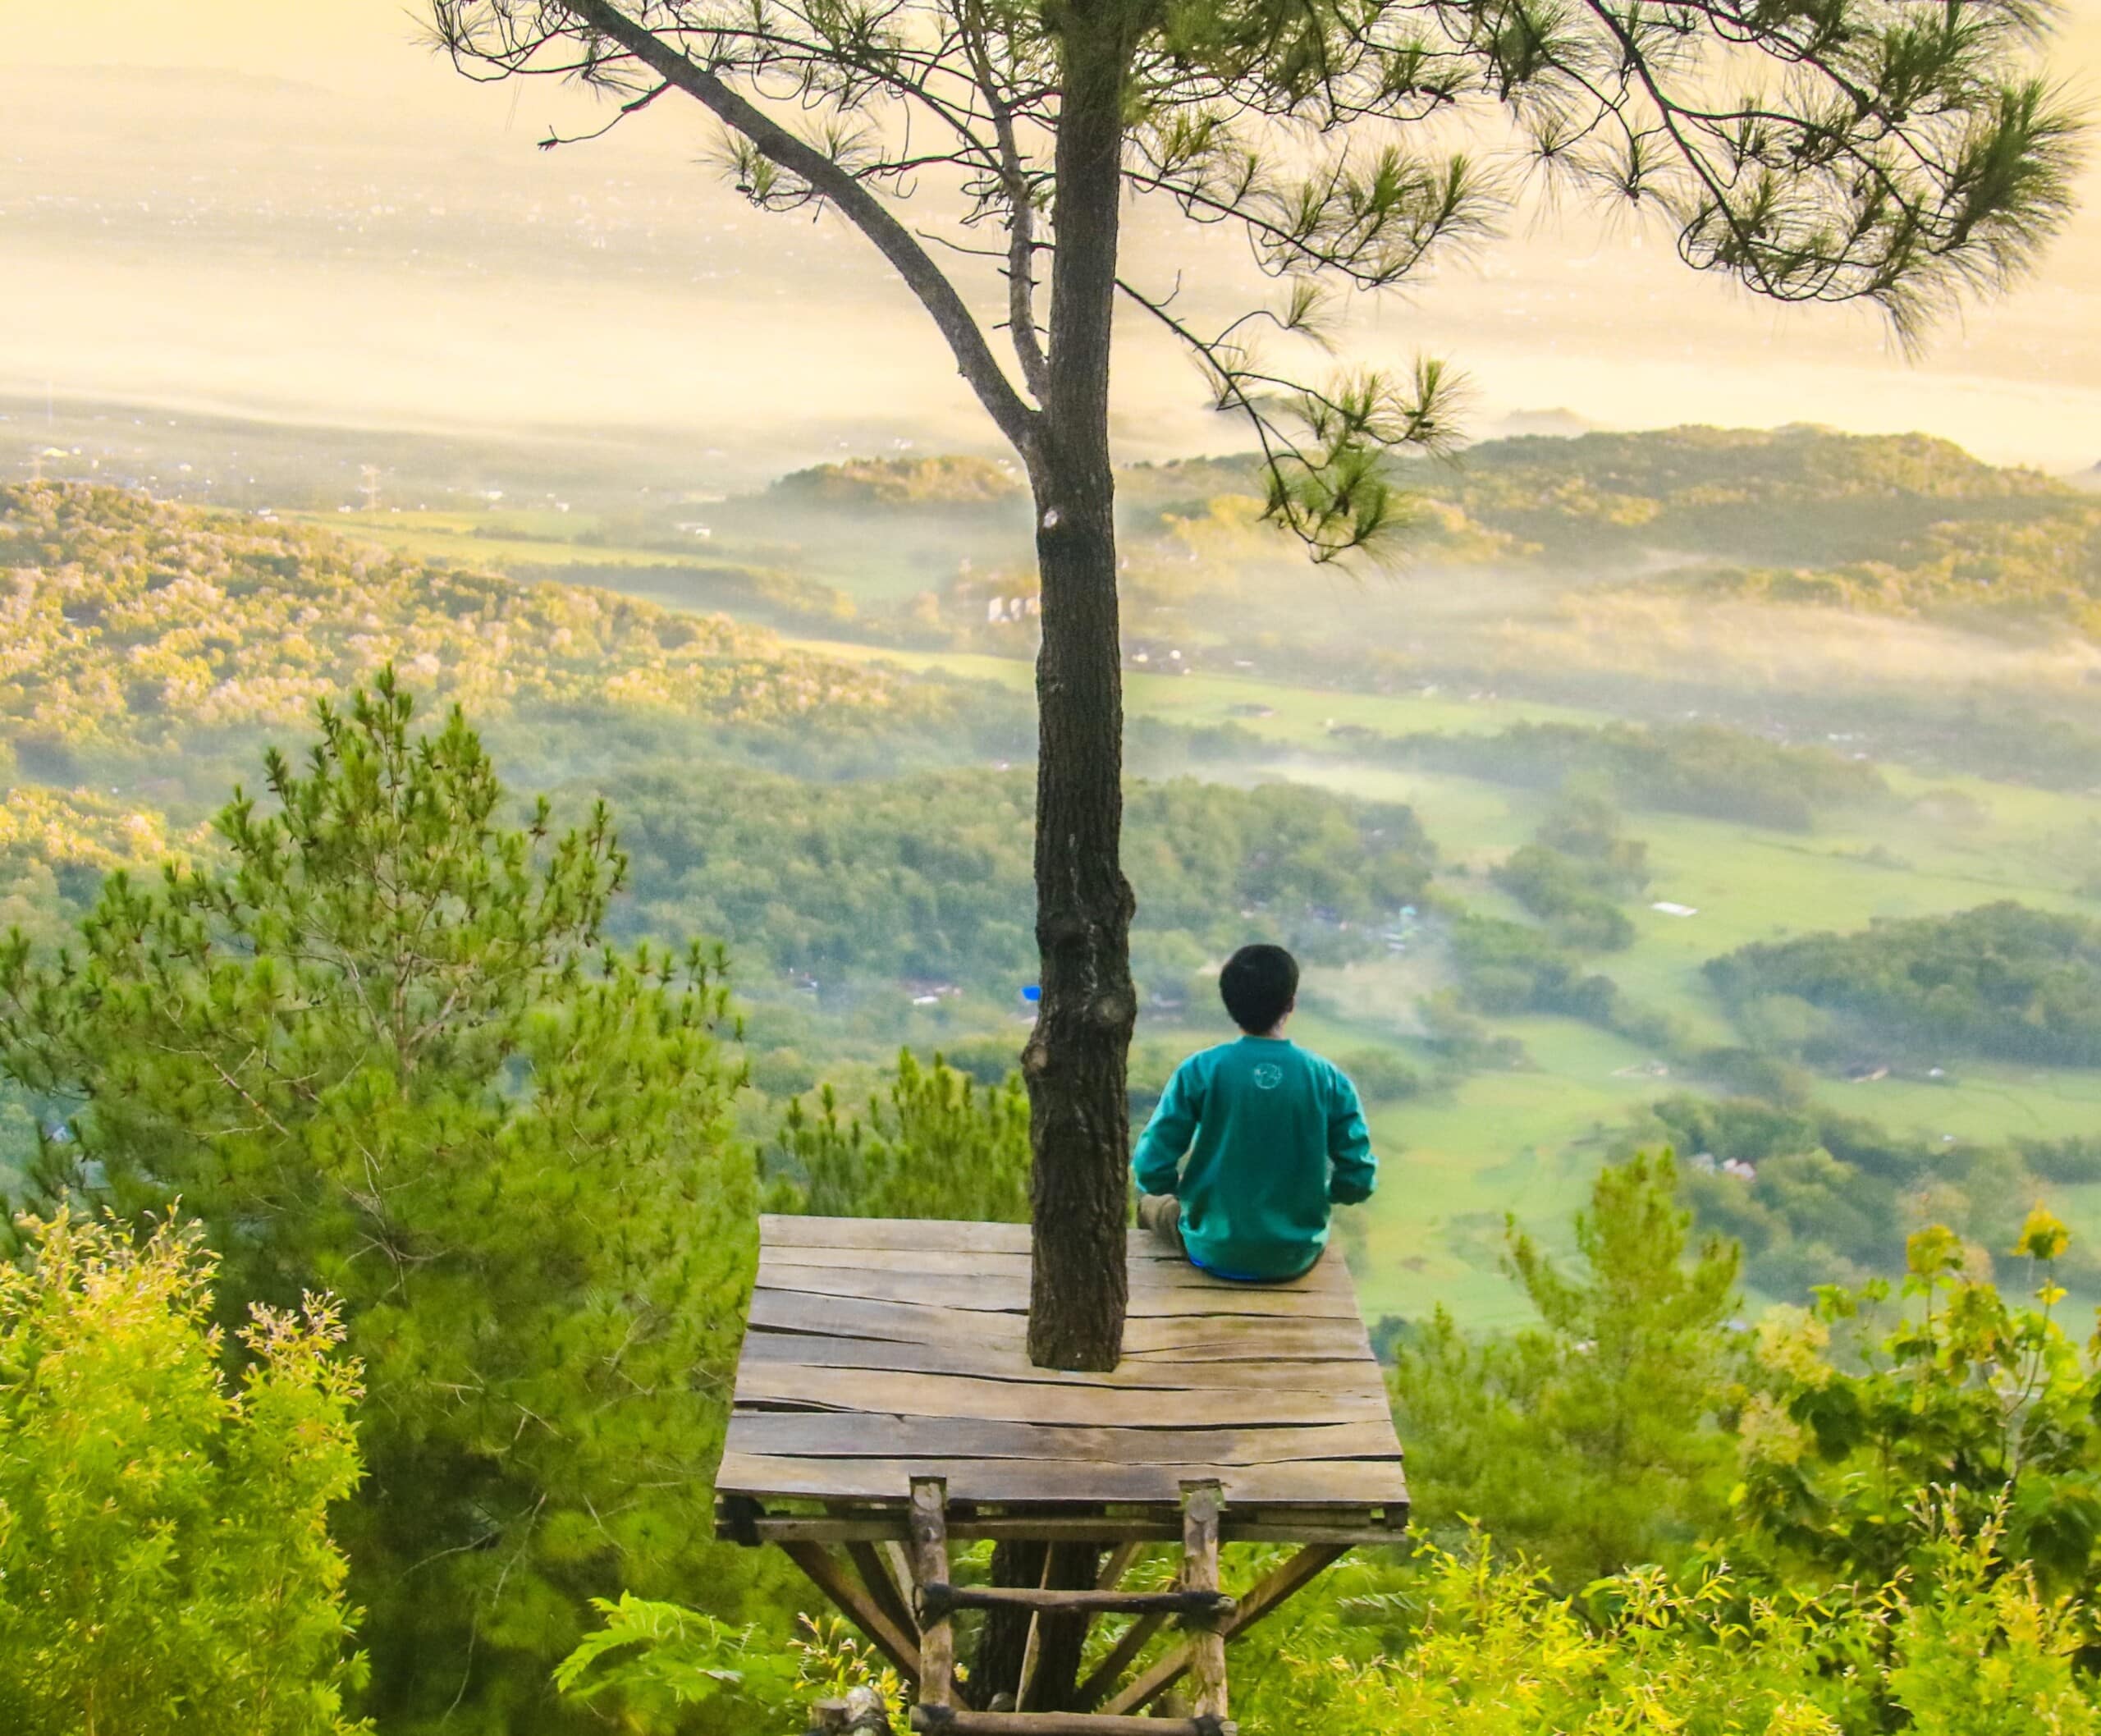 A man sits on a wooden platform overlooking a scenic valley, contemplating global innovation in consulting.